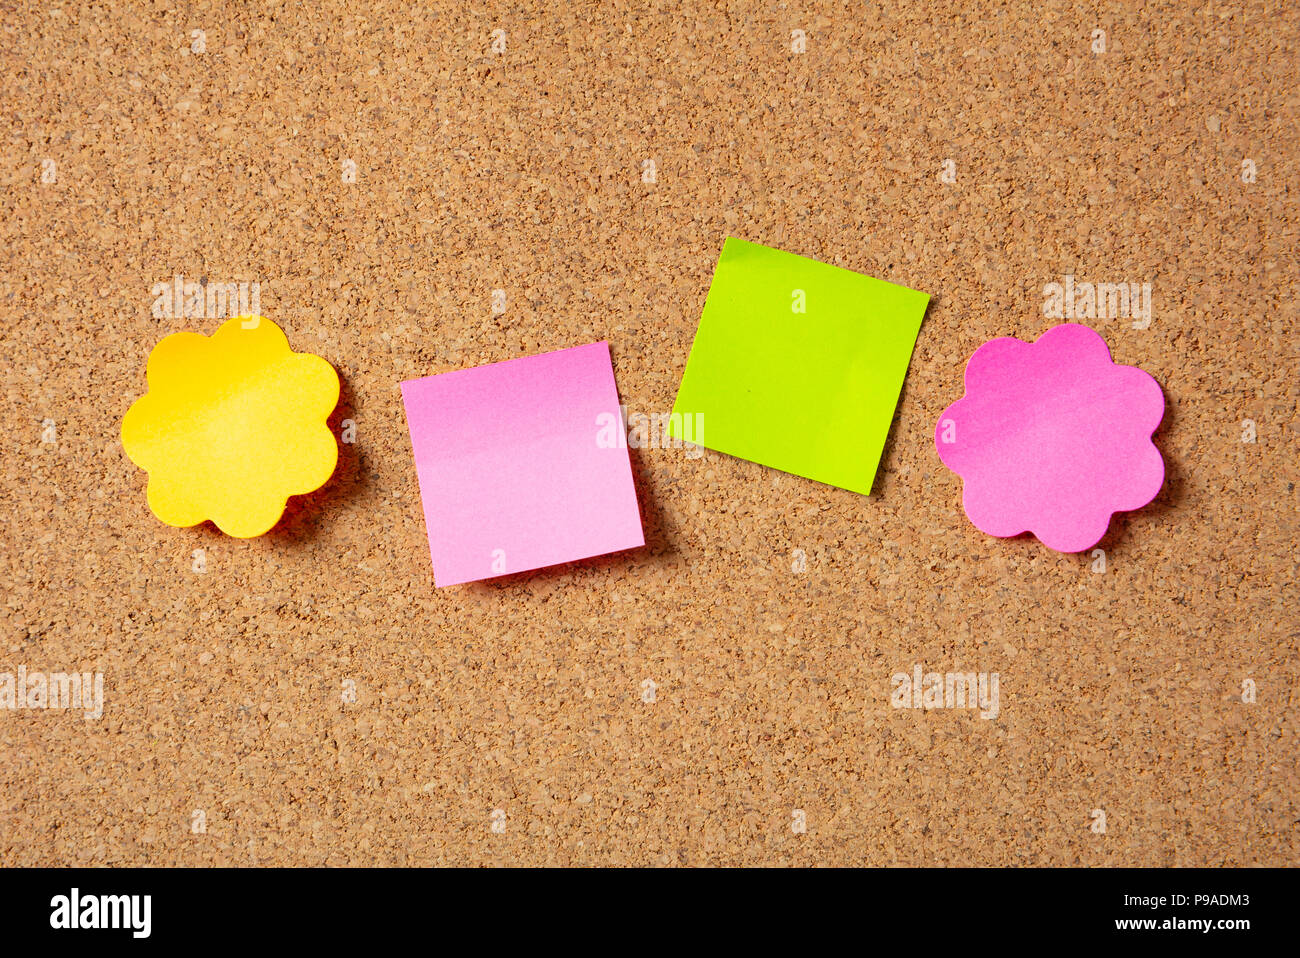 School concept. Four colorful notes in various shapes with copy space on cork background. Stock Photo